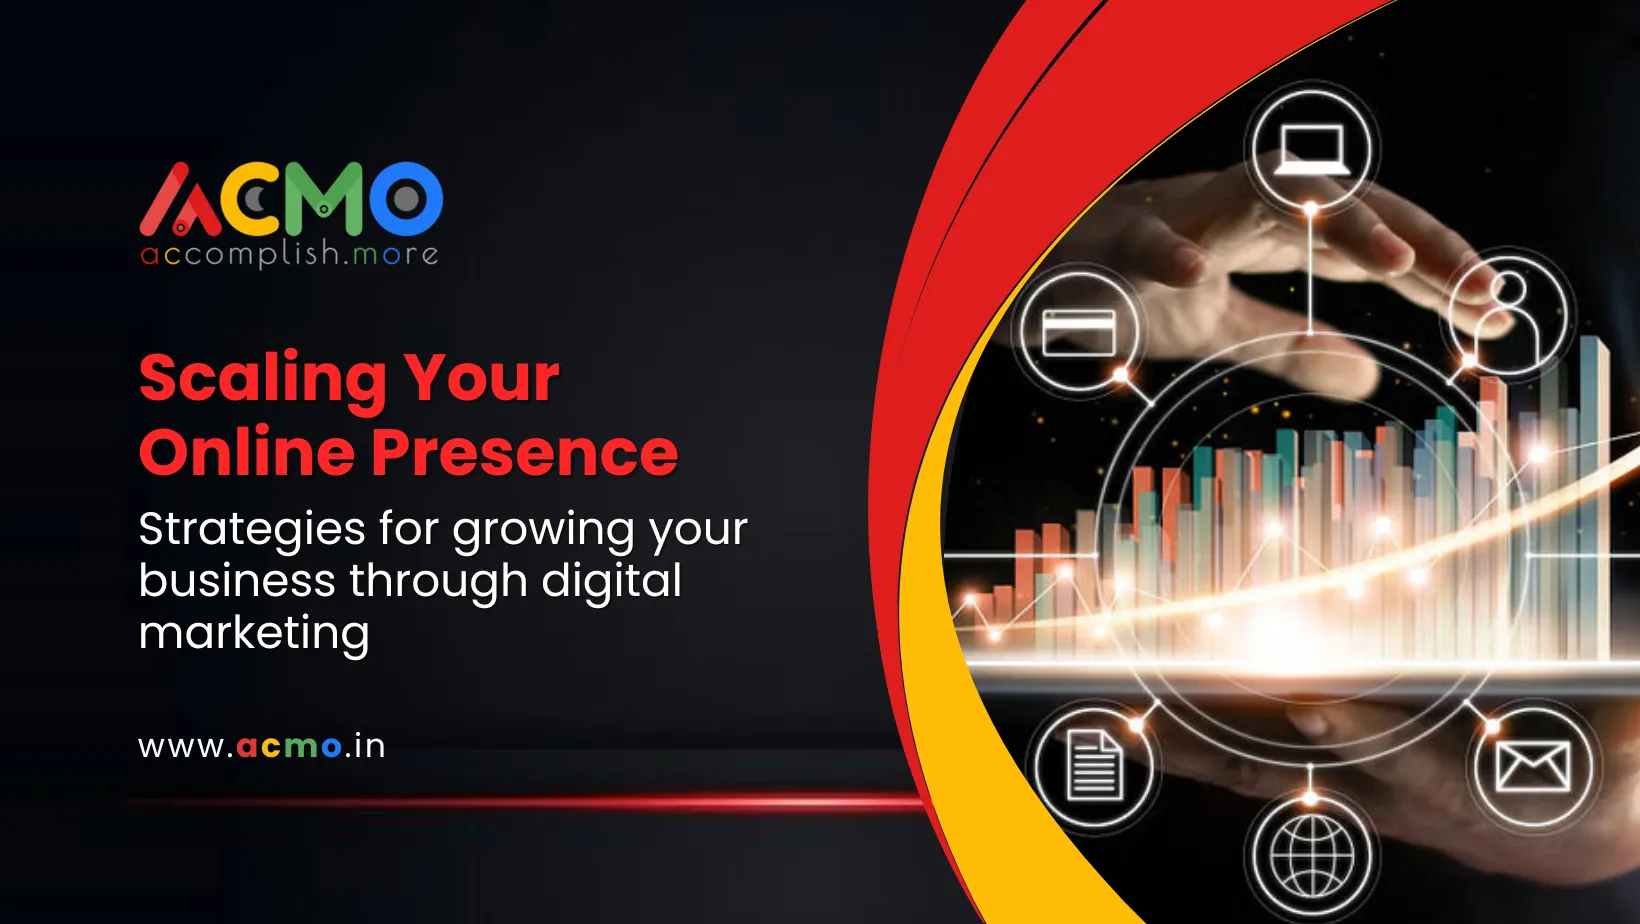 Scaling your Online Presence: Strategies for growing your business through digital marketing